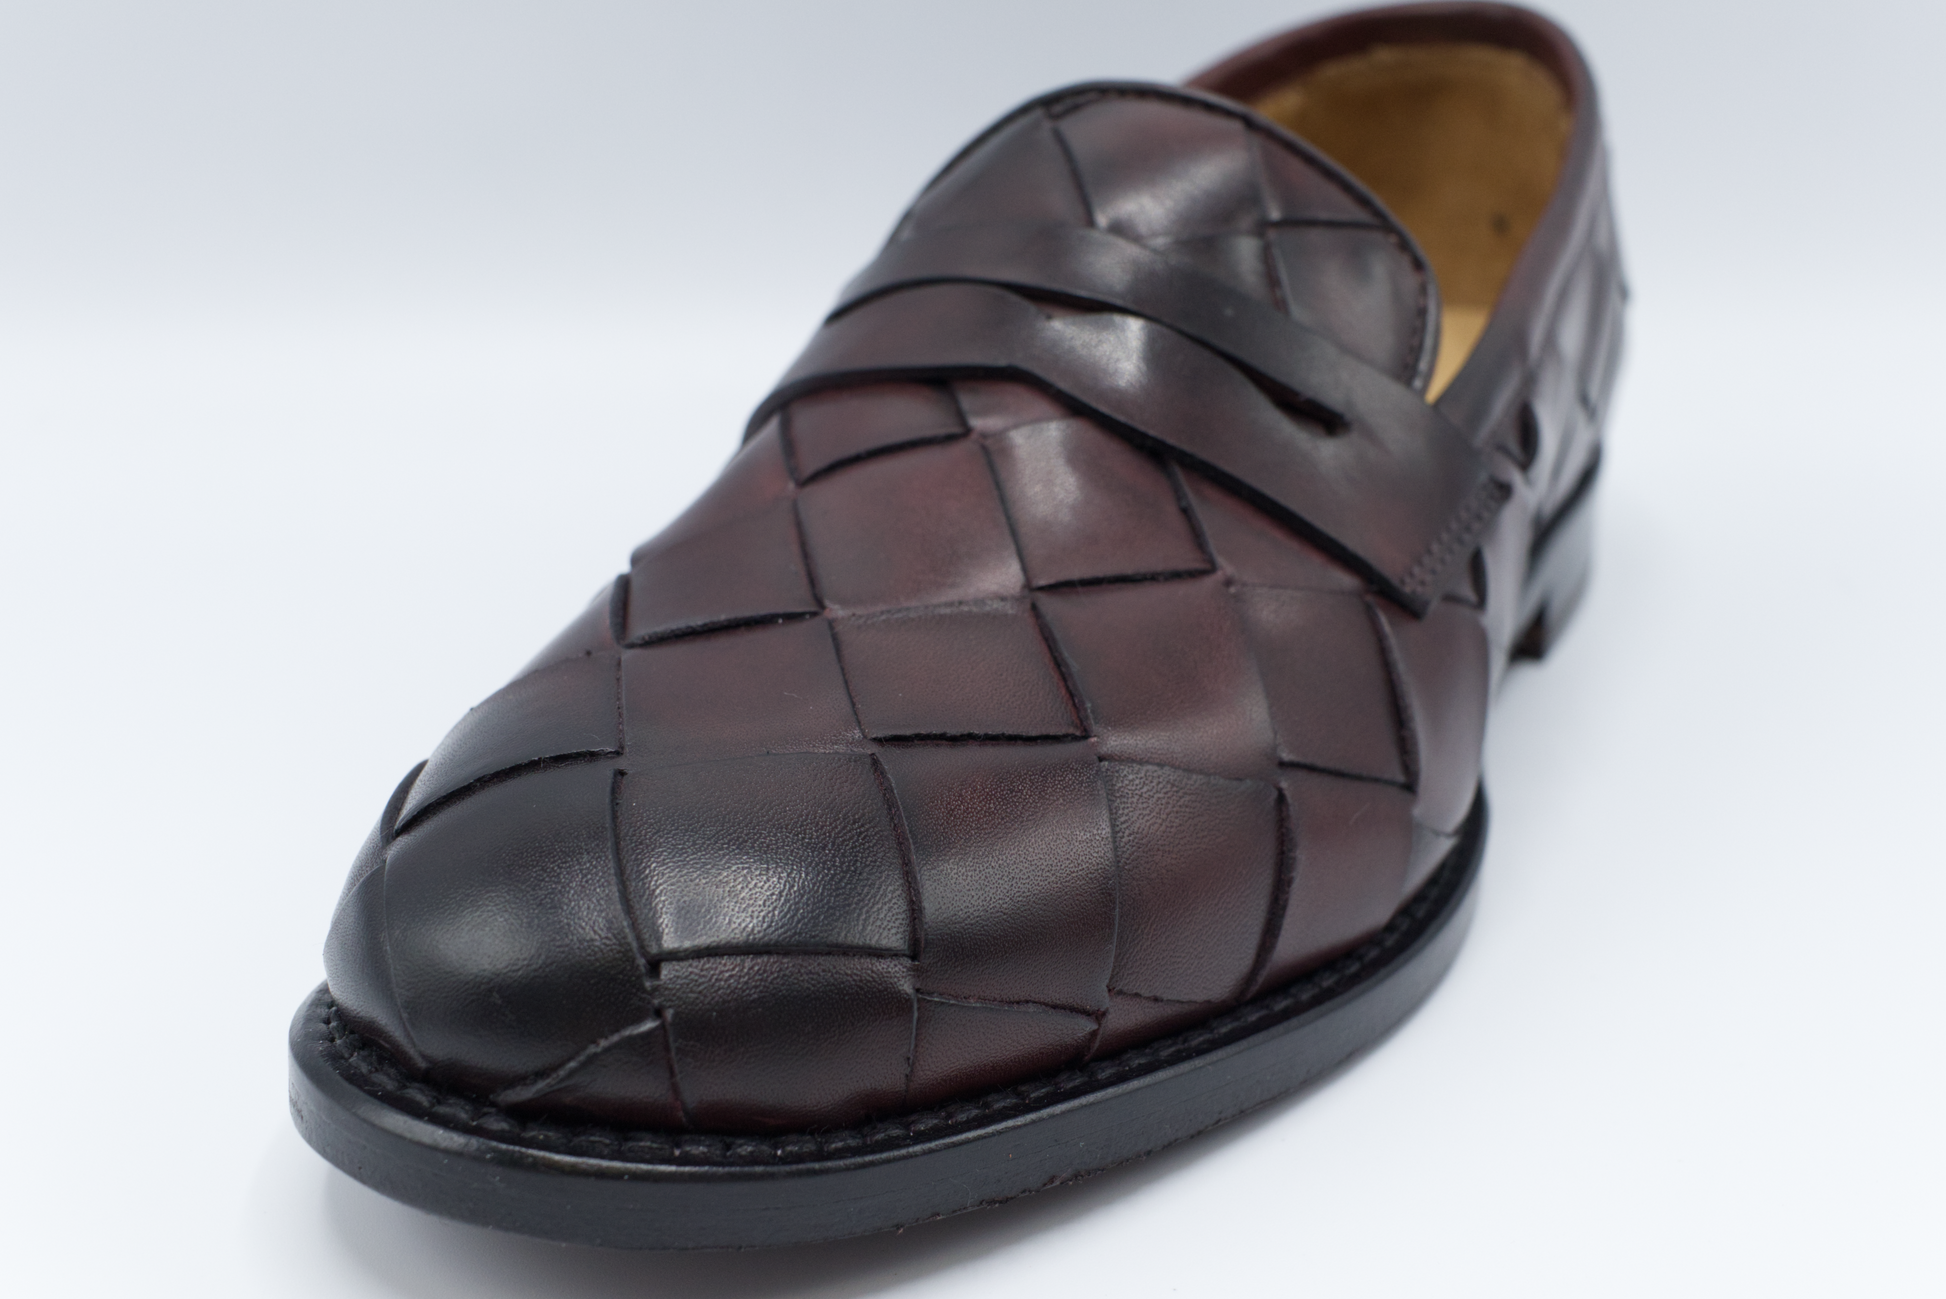 Shop Handmade Italian Leather Women's Woven Loafer in Brown or browse our range of hand-made Italian heels, sandals, and sneakers for men and women in leather or suede. We deliver to the USA and Canada & offer multiple payment plans as well as accept multiple safe & secure payment methods.